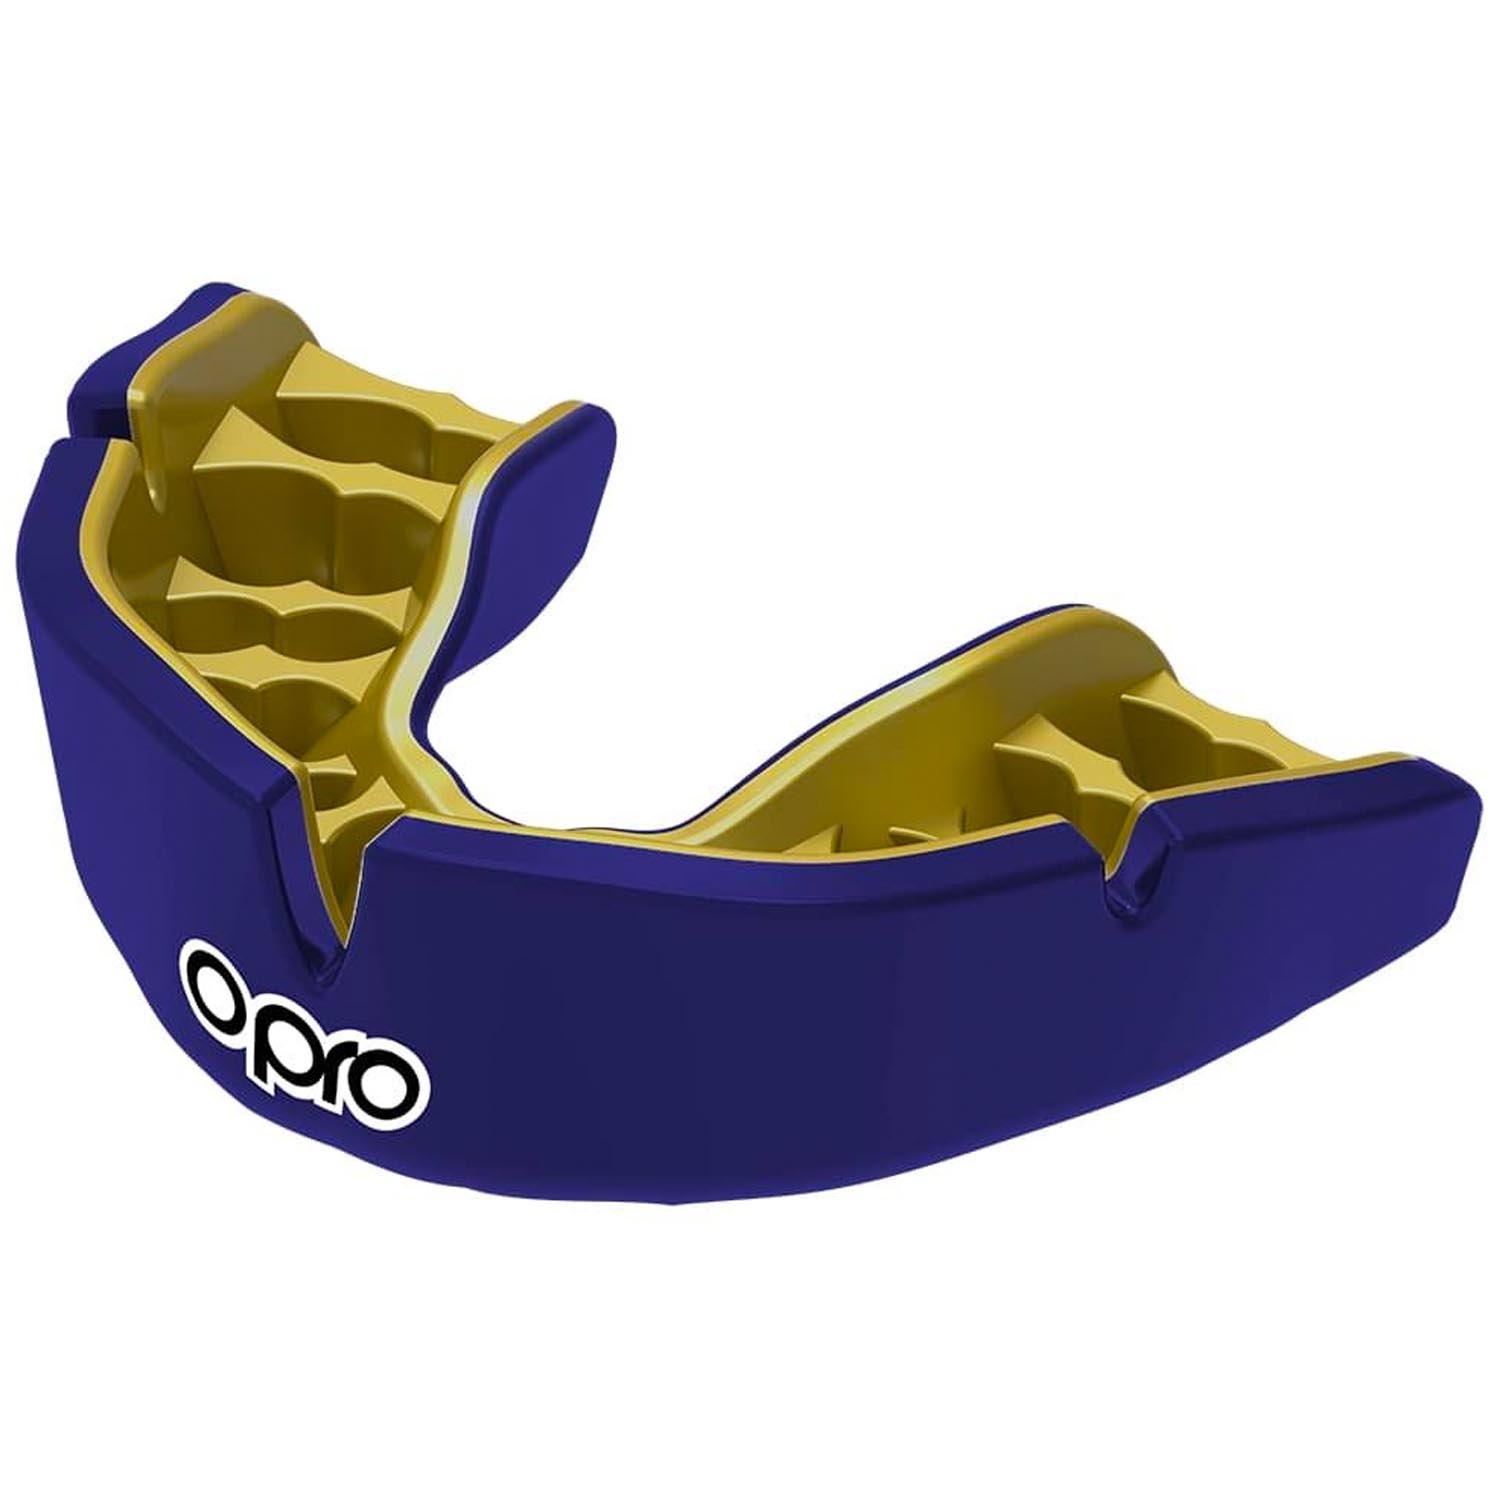 OPRO Mouthguard, Instant Custom Fit, dark blue